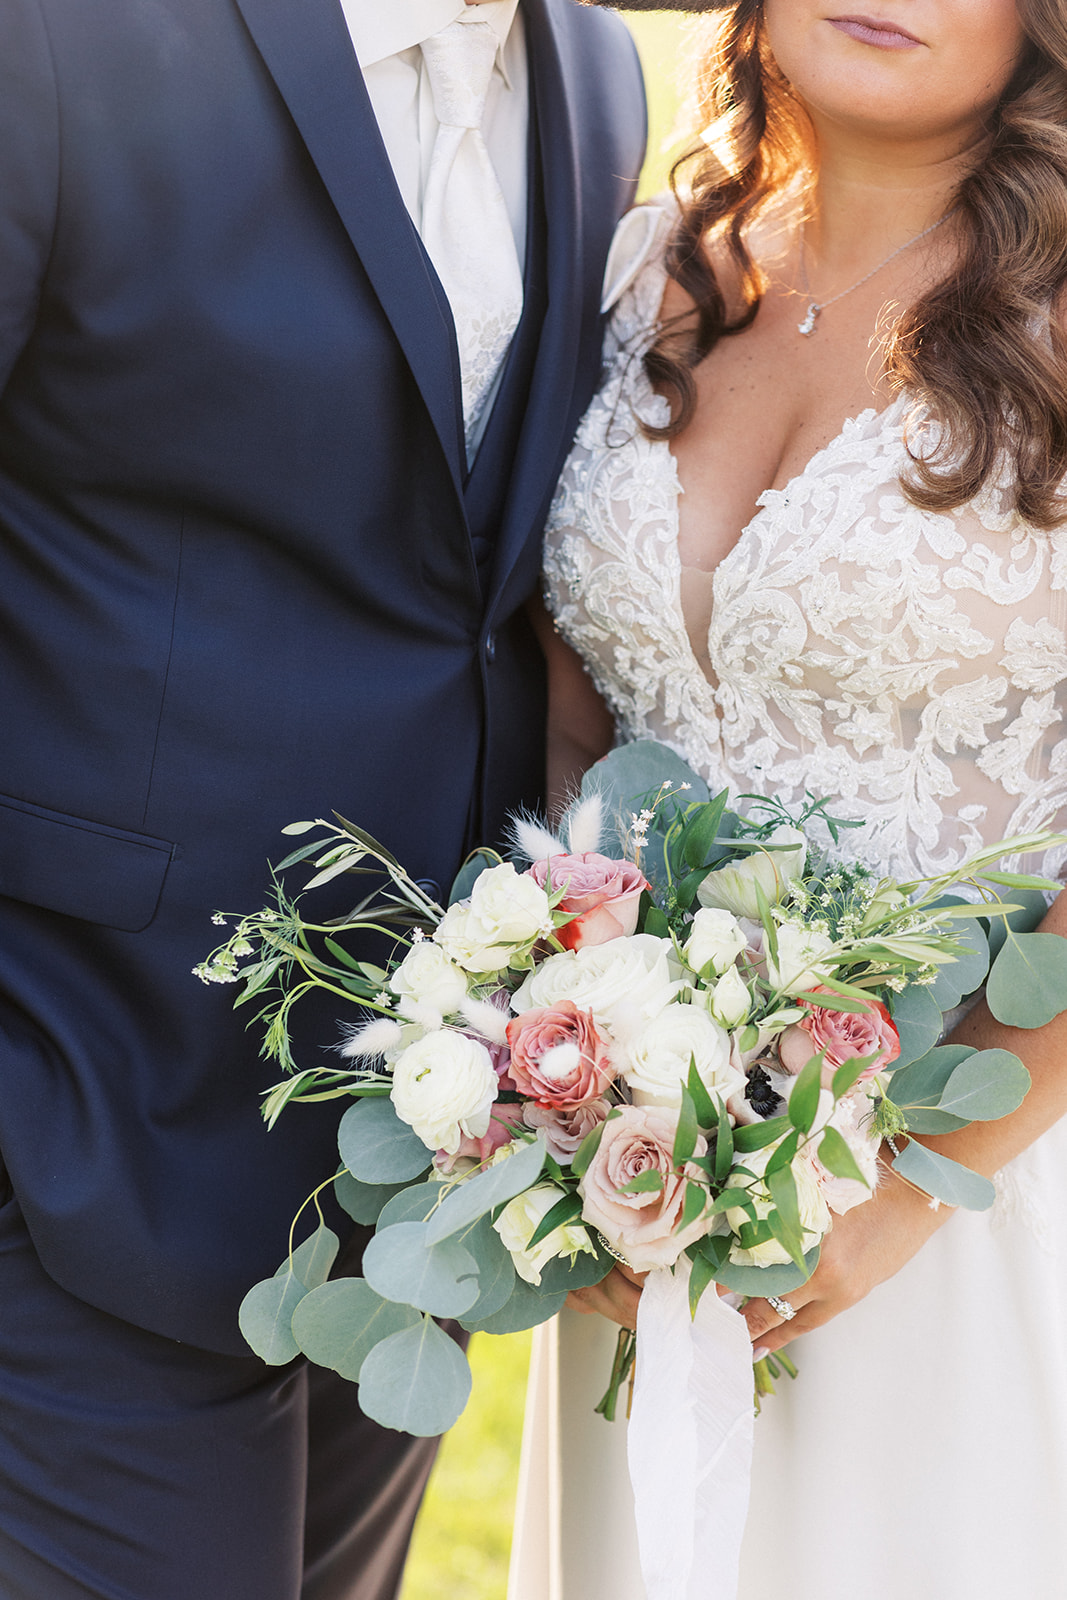 Details of a bride's white lace dress and her white and pink bouquet